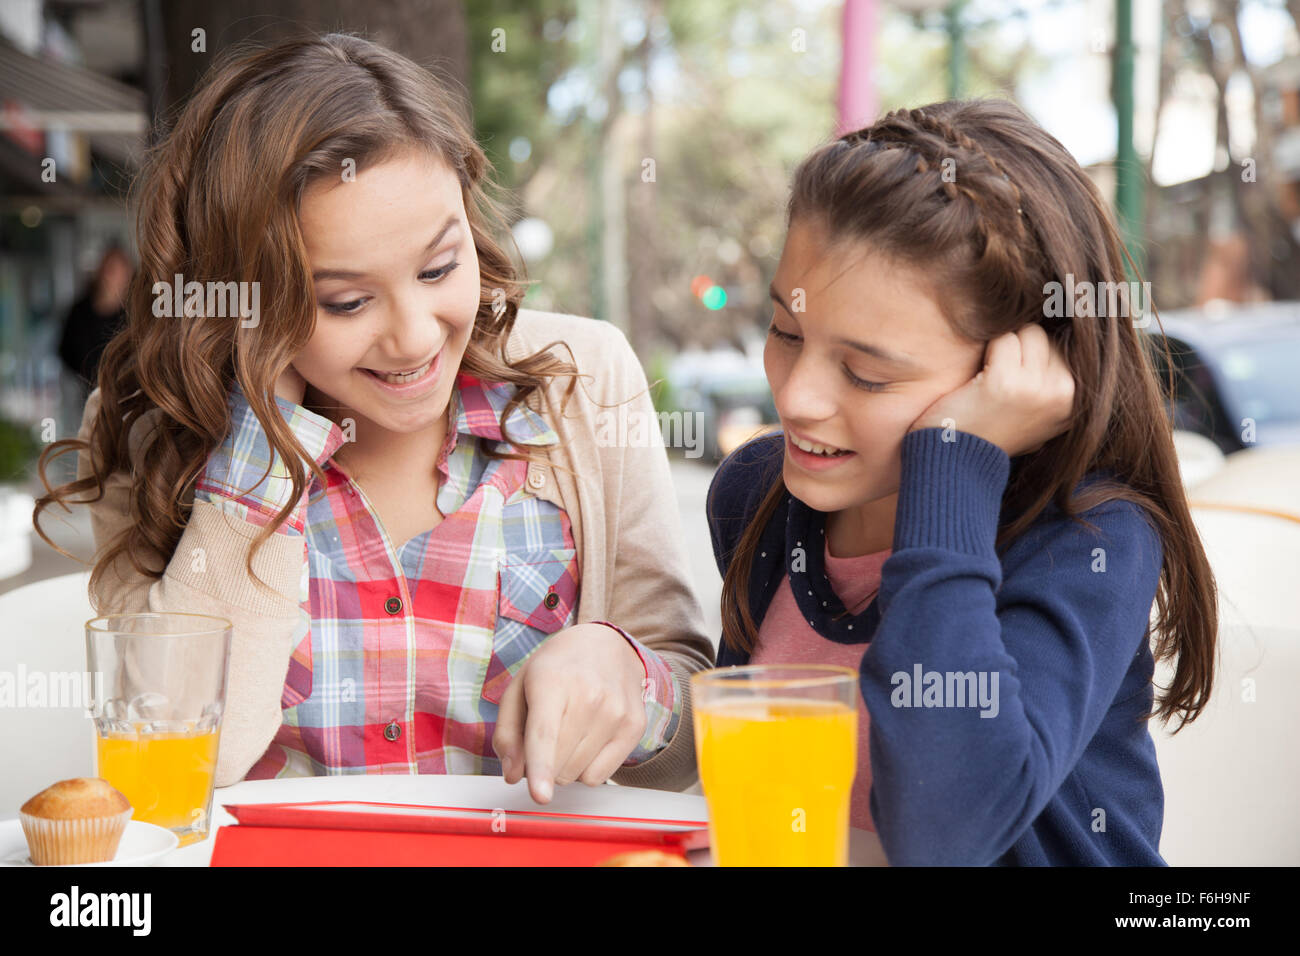 Two girls playing with the tablet Stock Photo